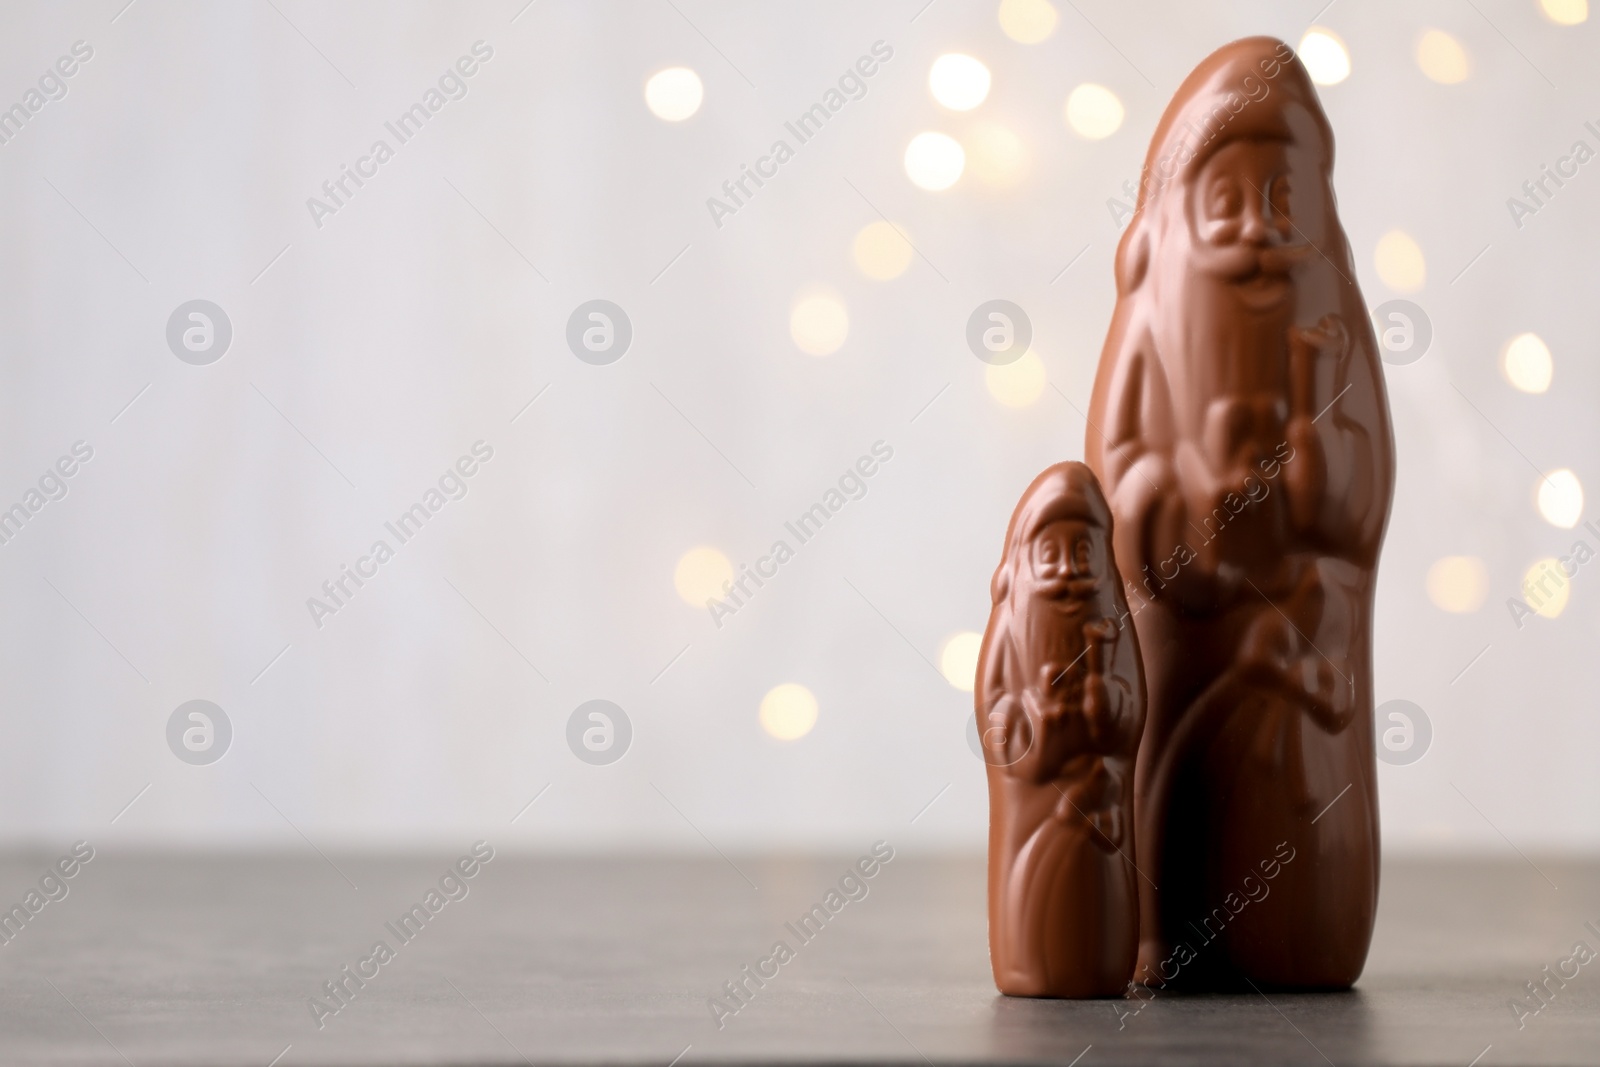 Photo of Small and big chocolate Santa Claus candies on light background with blurred Christmas lights